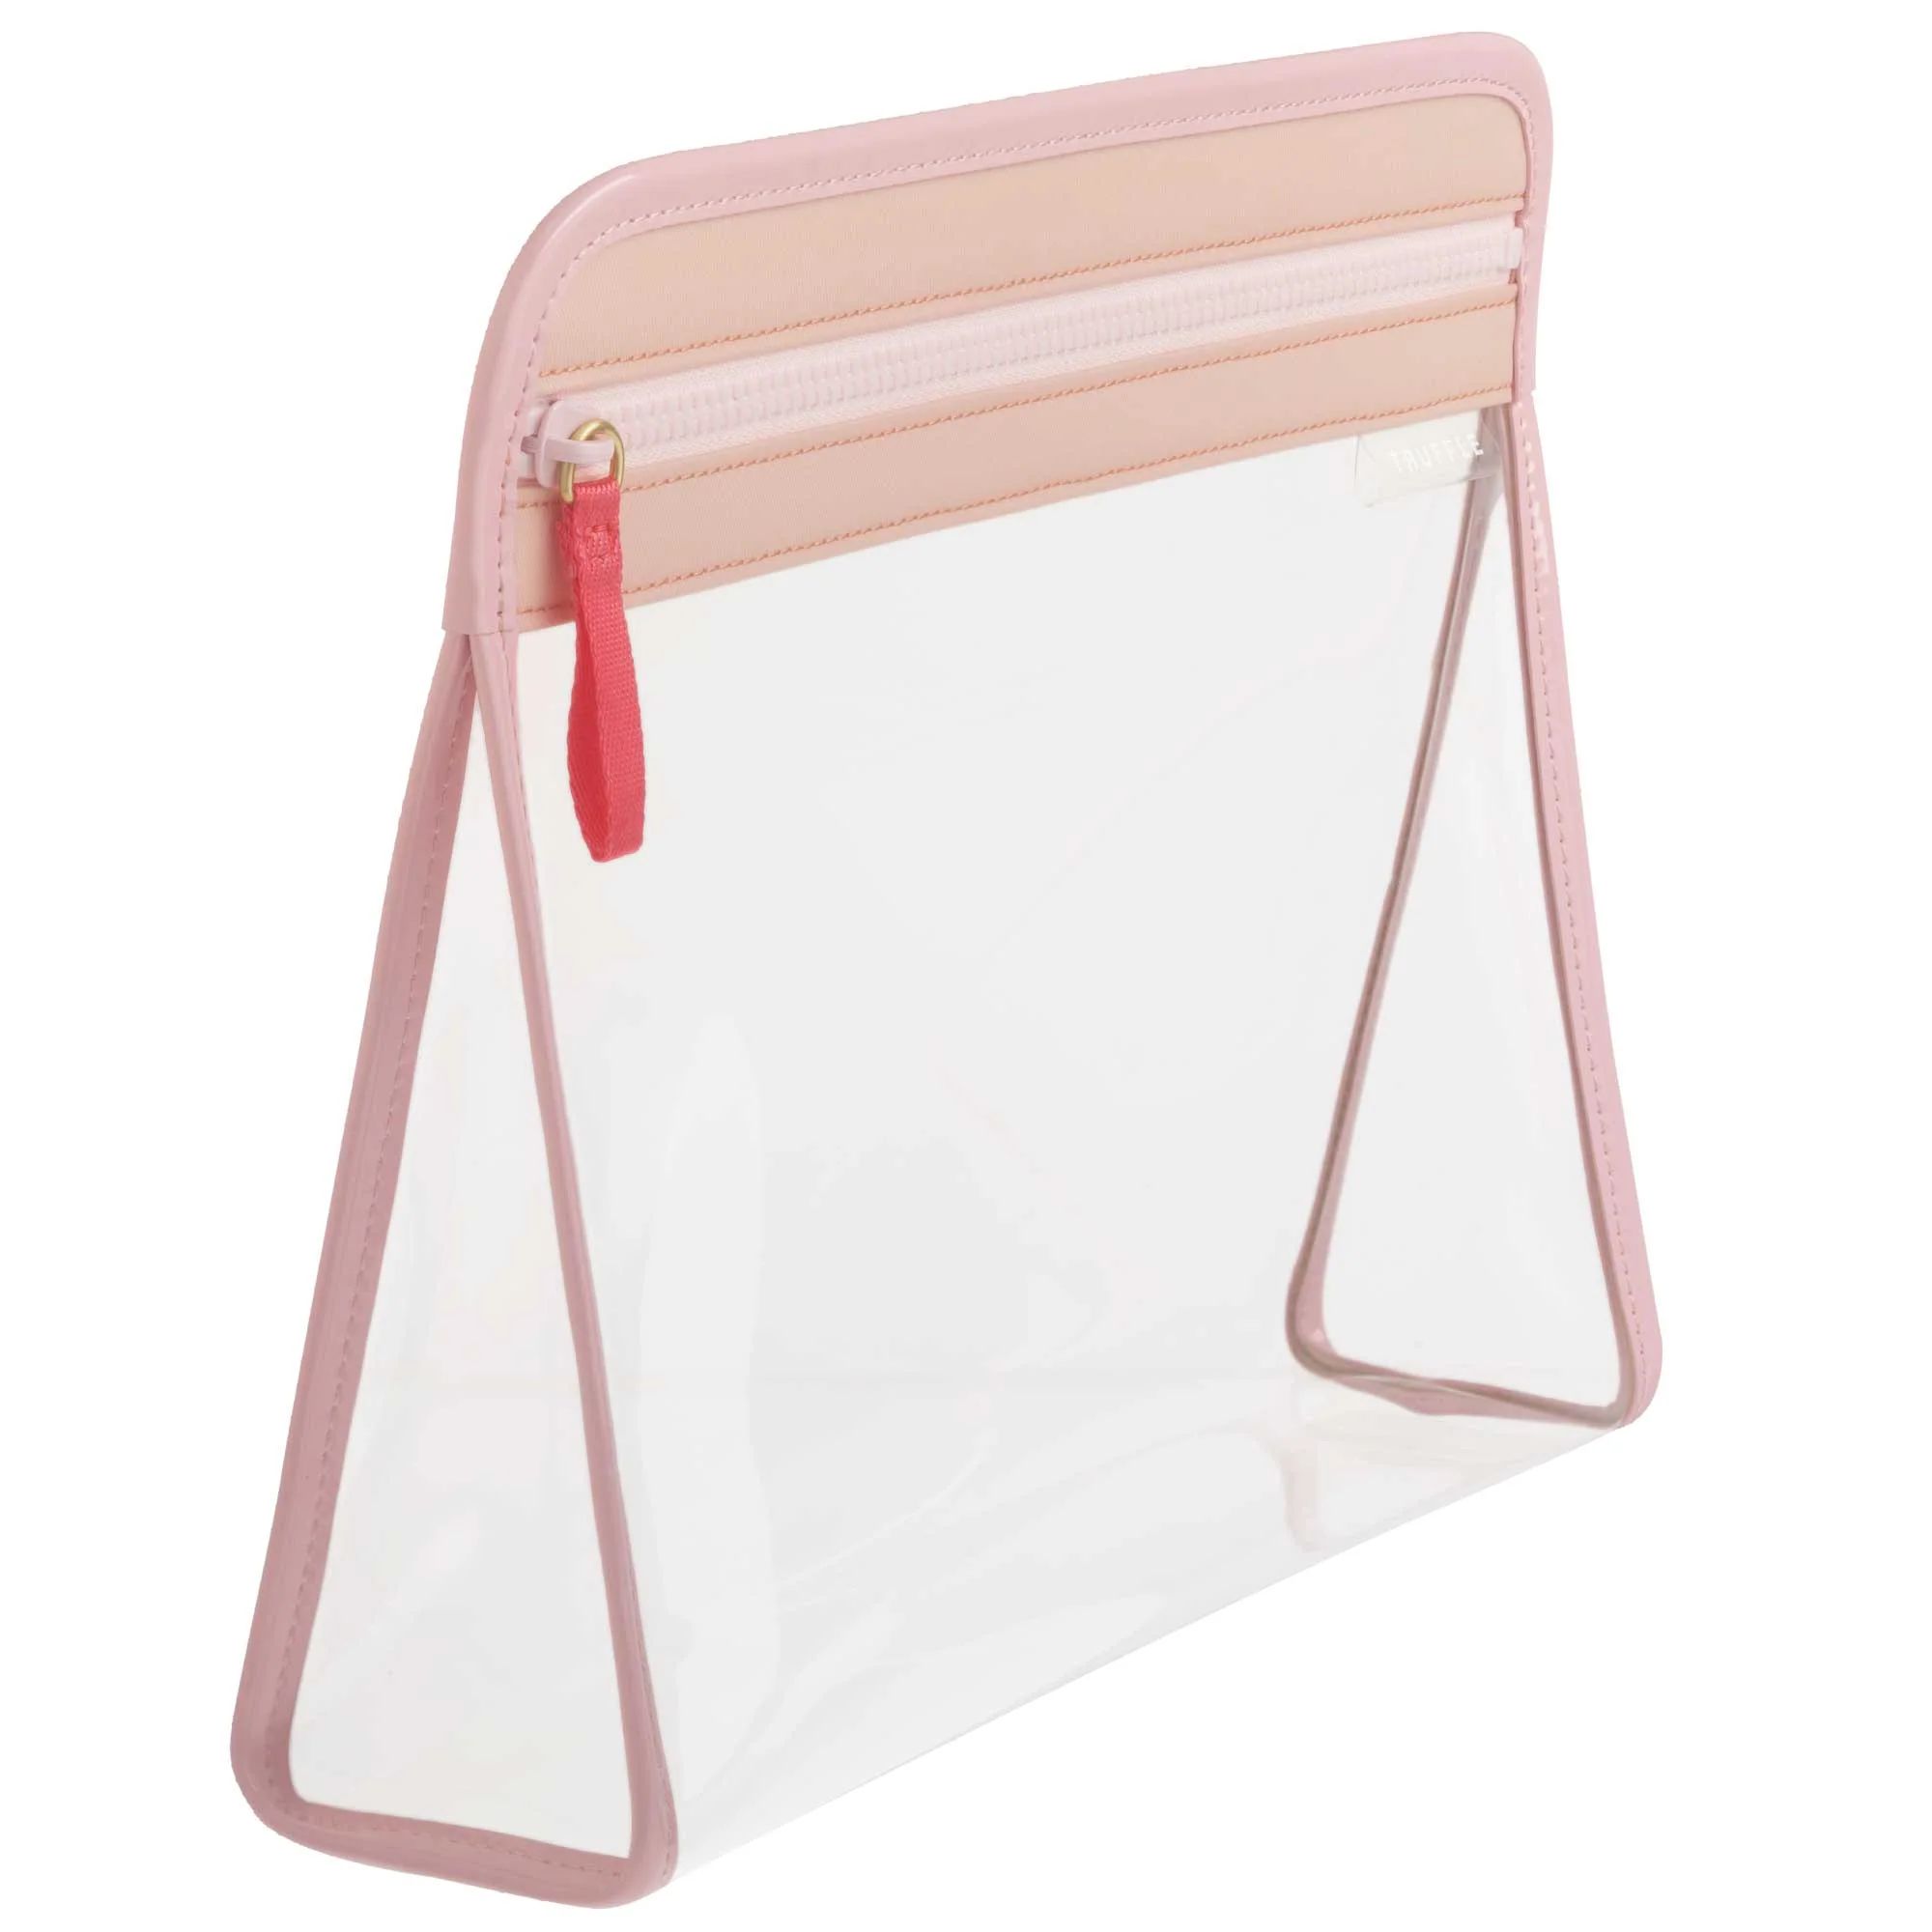 Clarity Pouch Large - Large Clear Makeup Bag | Truffle | TRUFFLE